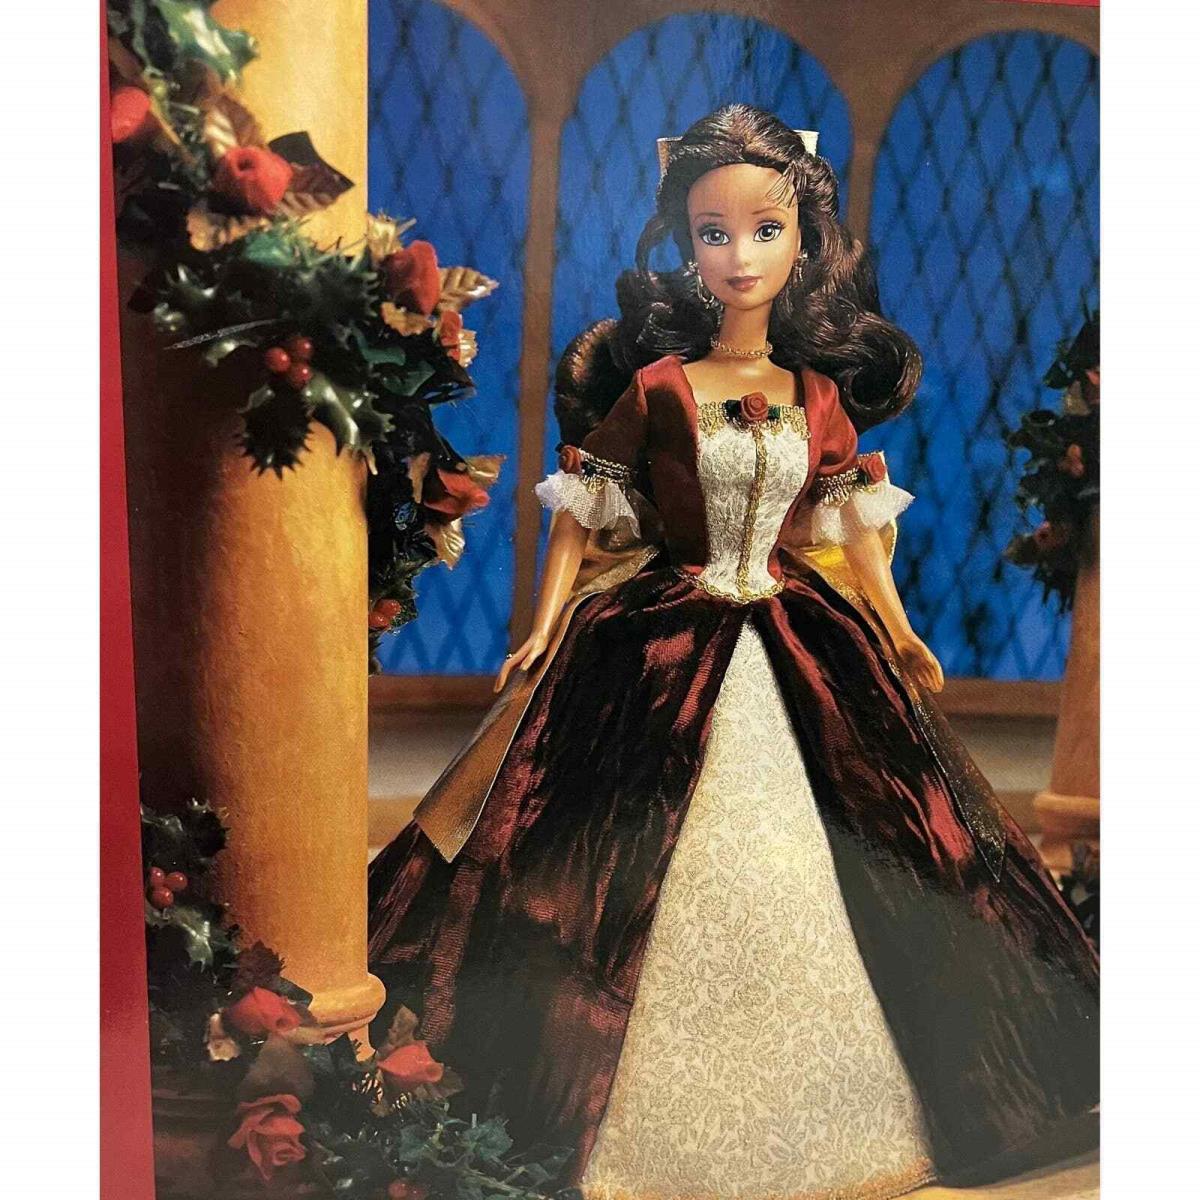 Disney Princess Belle Barbie Doll Beauty The Beast 1997 Holiday Collection